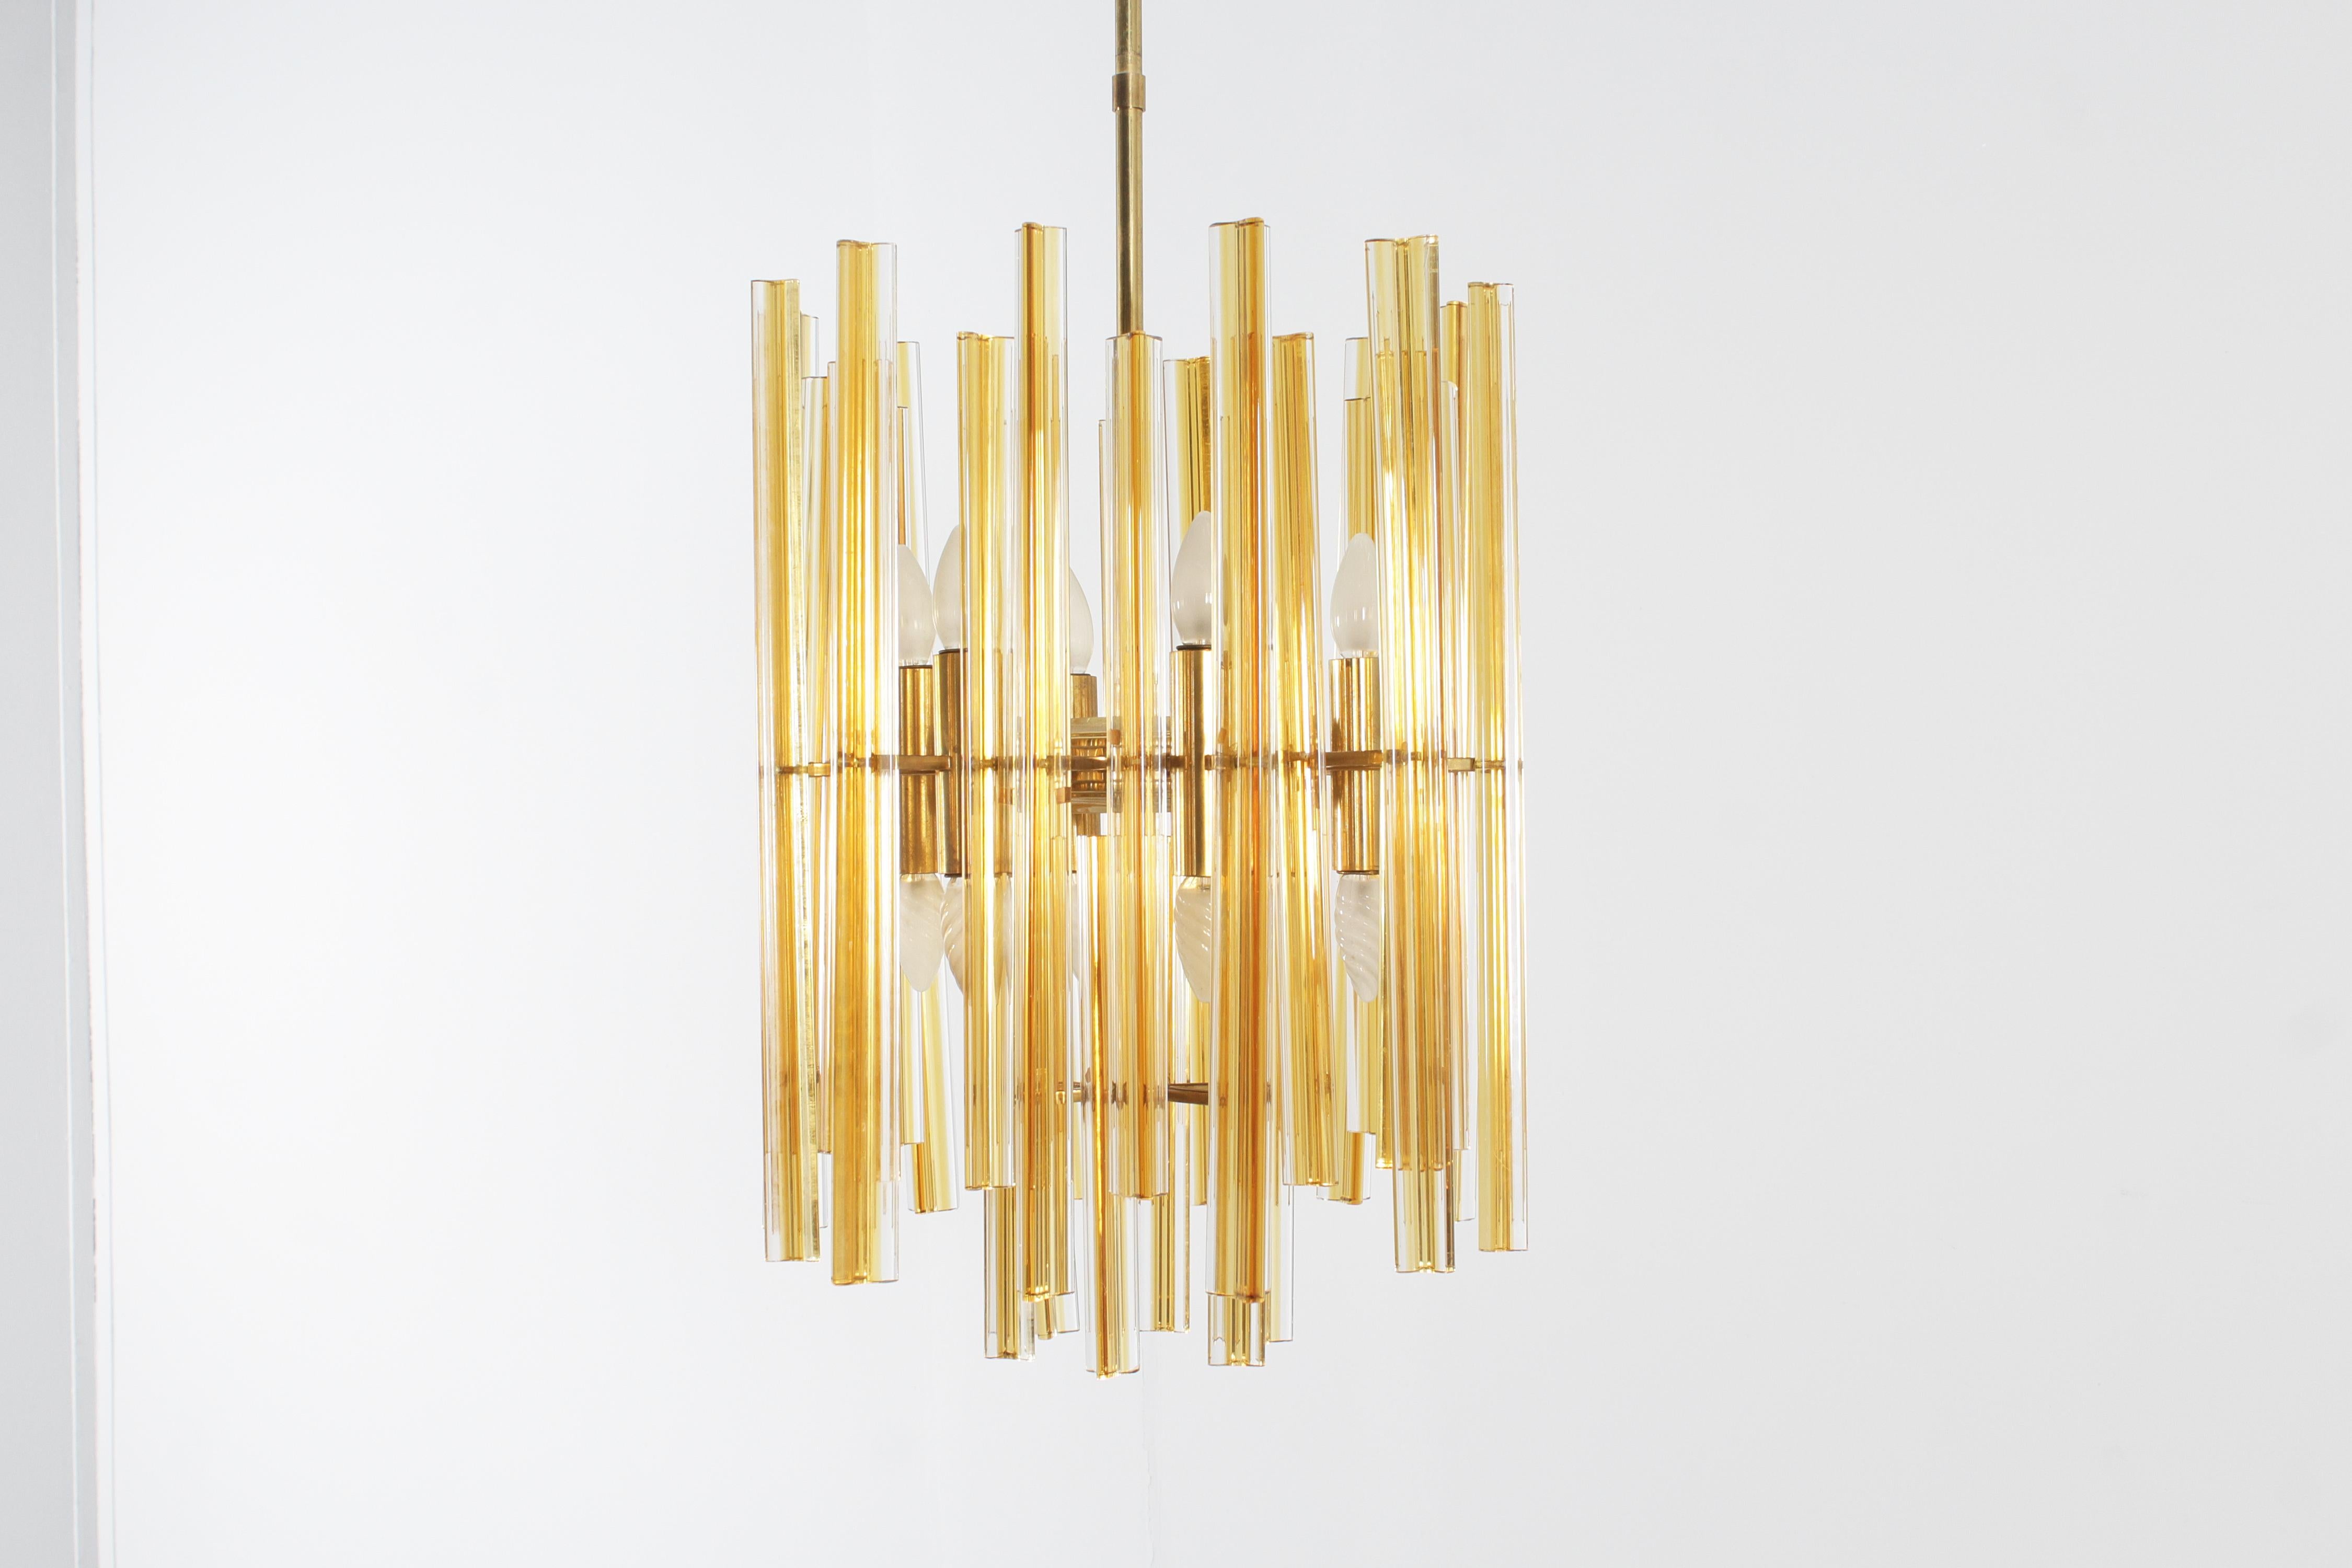 Rare and very elegant chandelier with 